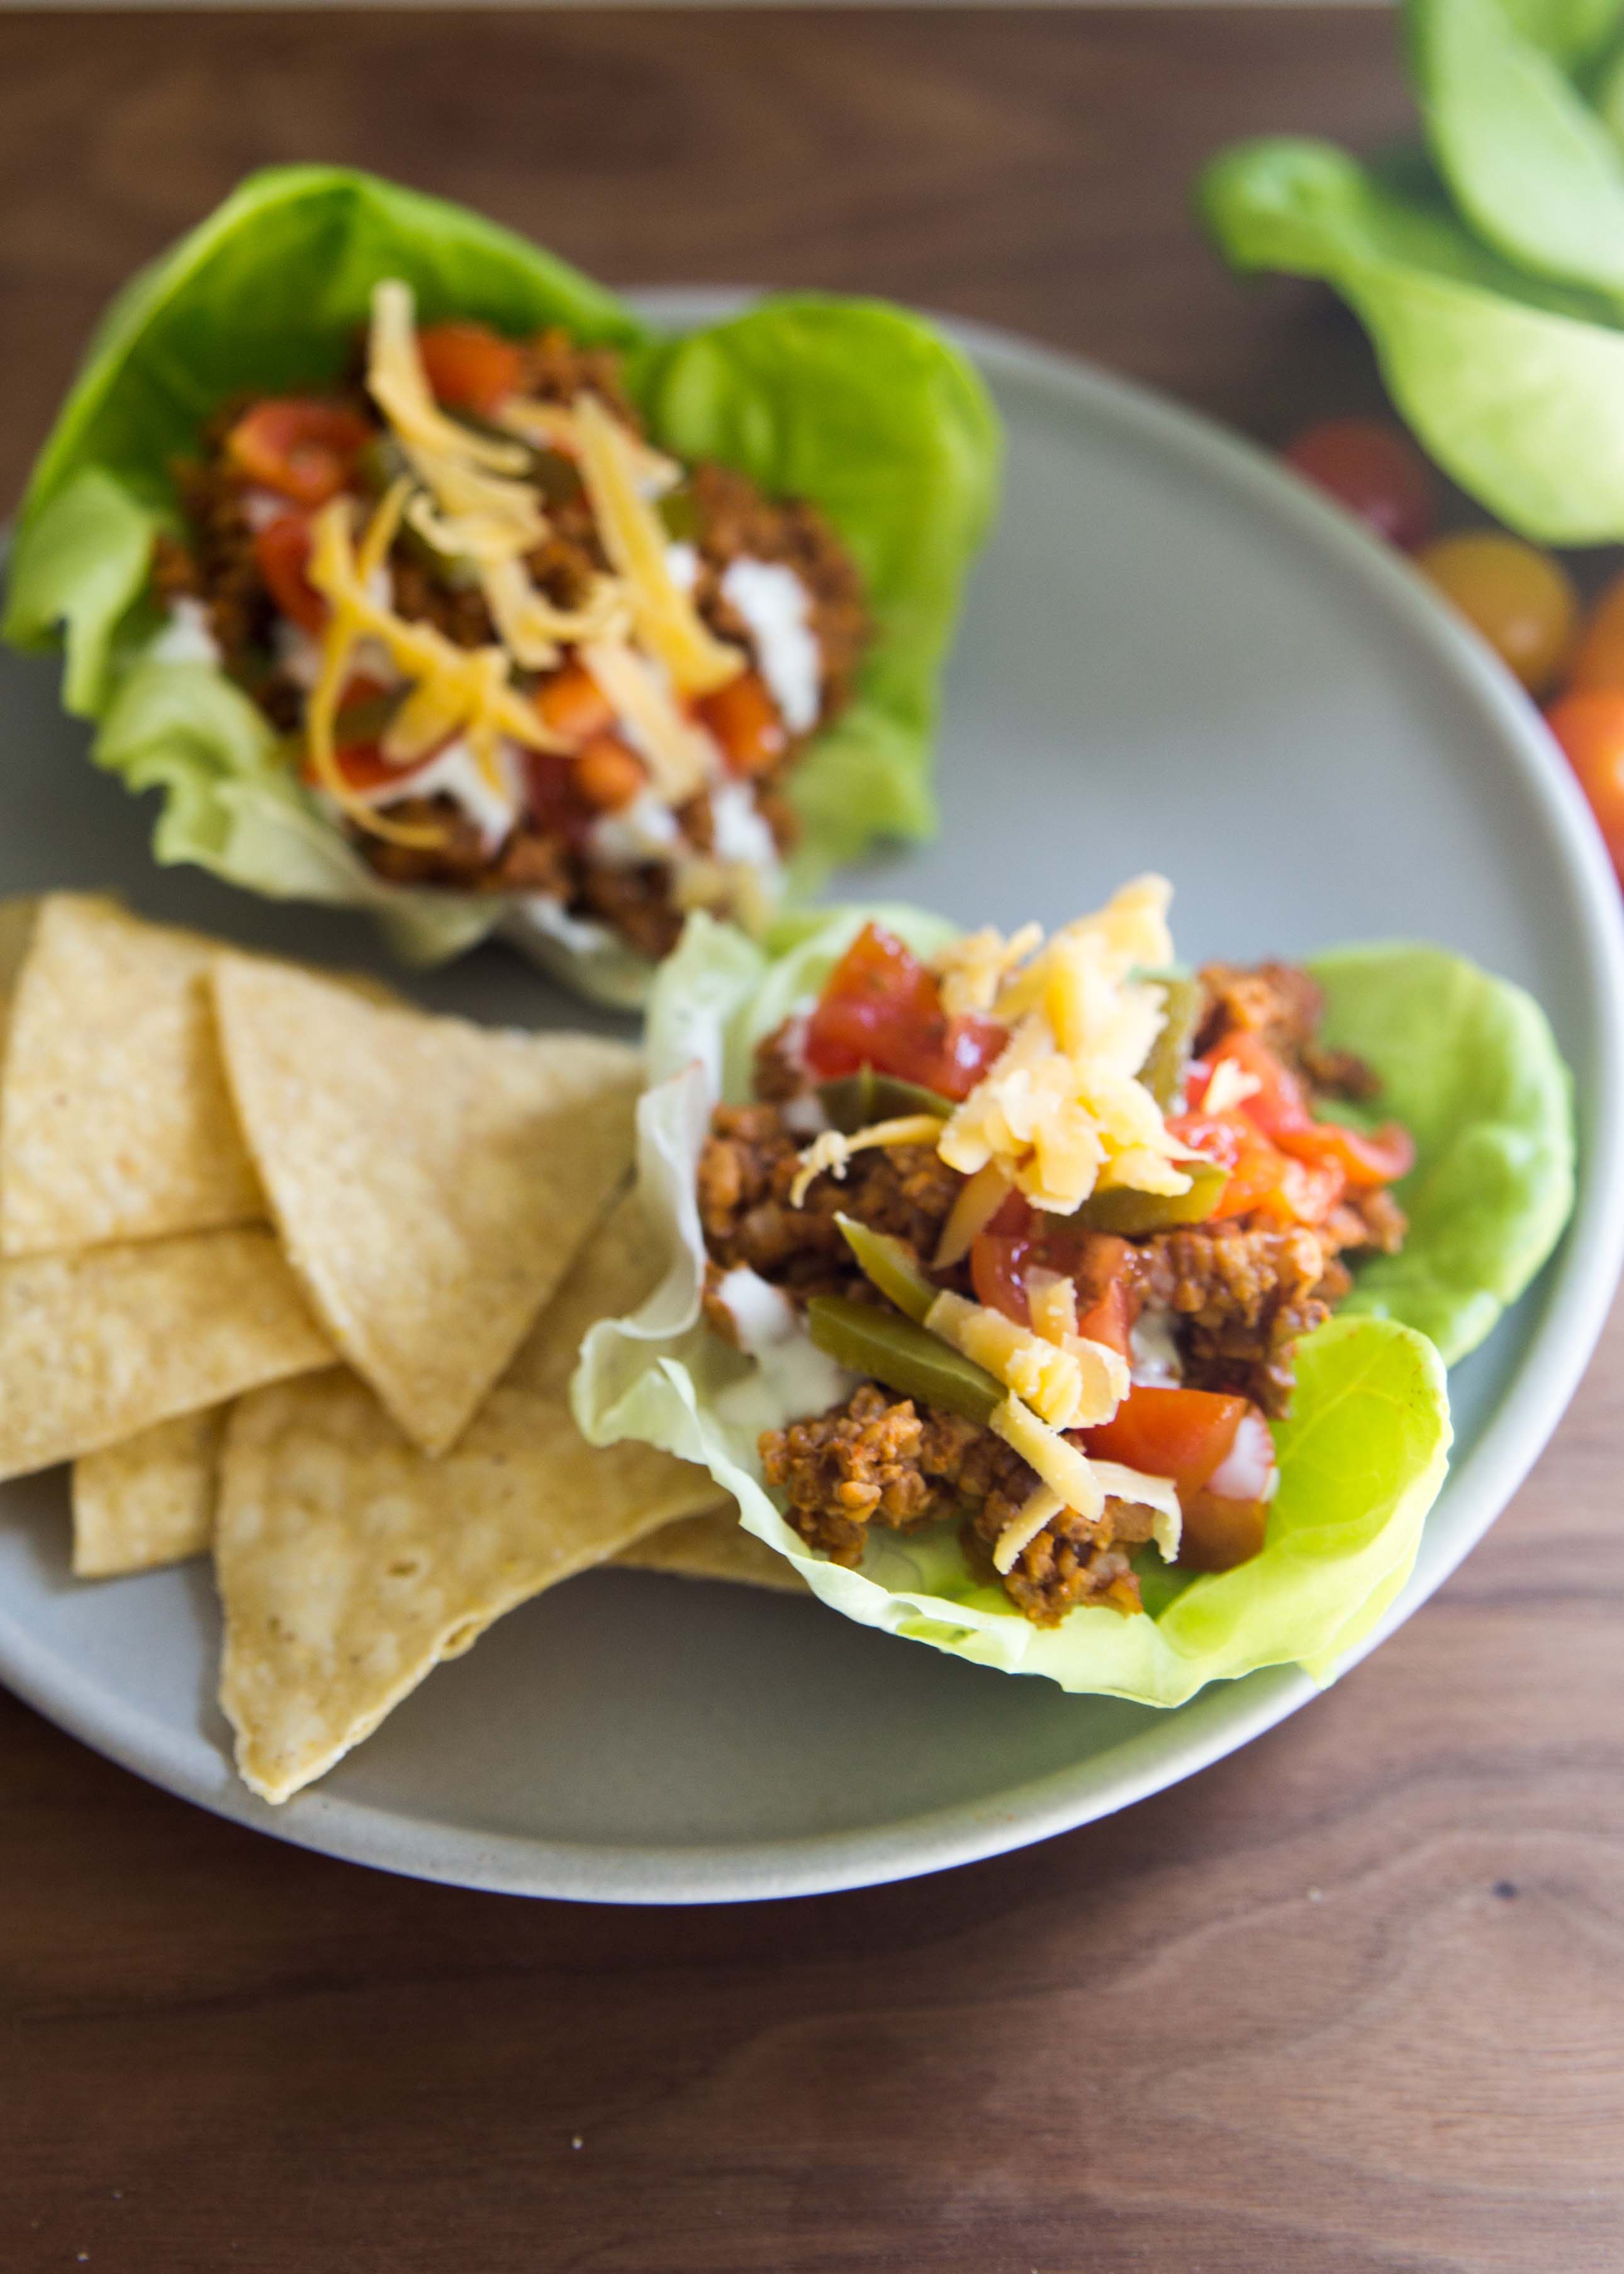 Lettuce cup tacos make a festive, fast, and nutritious dinner partly because bulgur cooks so quickly. Weeknights are made for bulgur recipes.